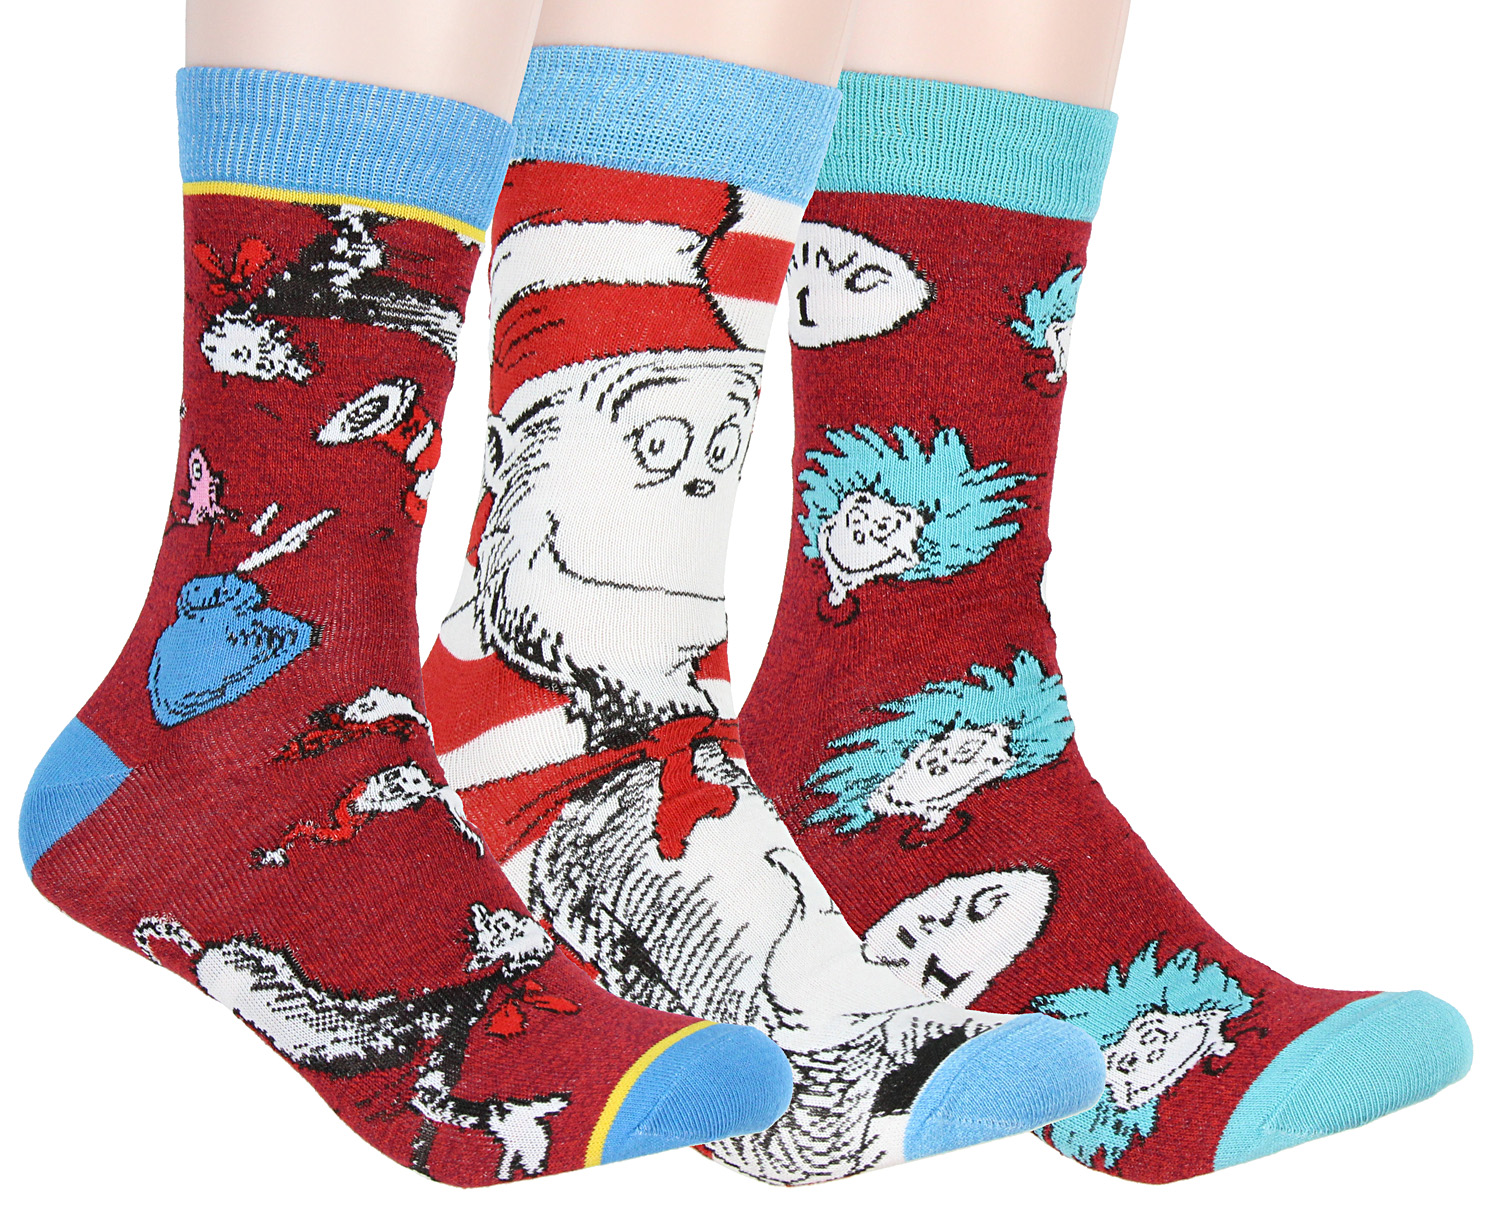 Dr. Suess Dr. Seuss Socks Adult Cat In The Hat Thing 1 Thing 2 Character Design 3 Pack Mid-Calf Crew Socks